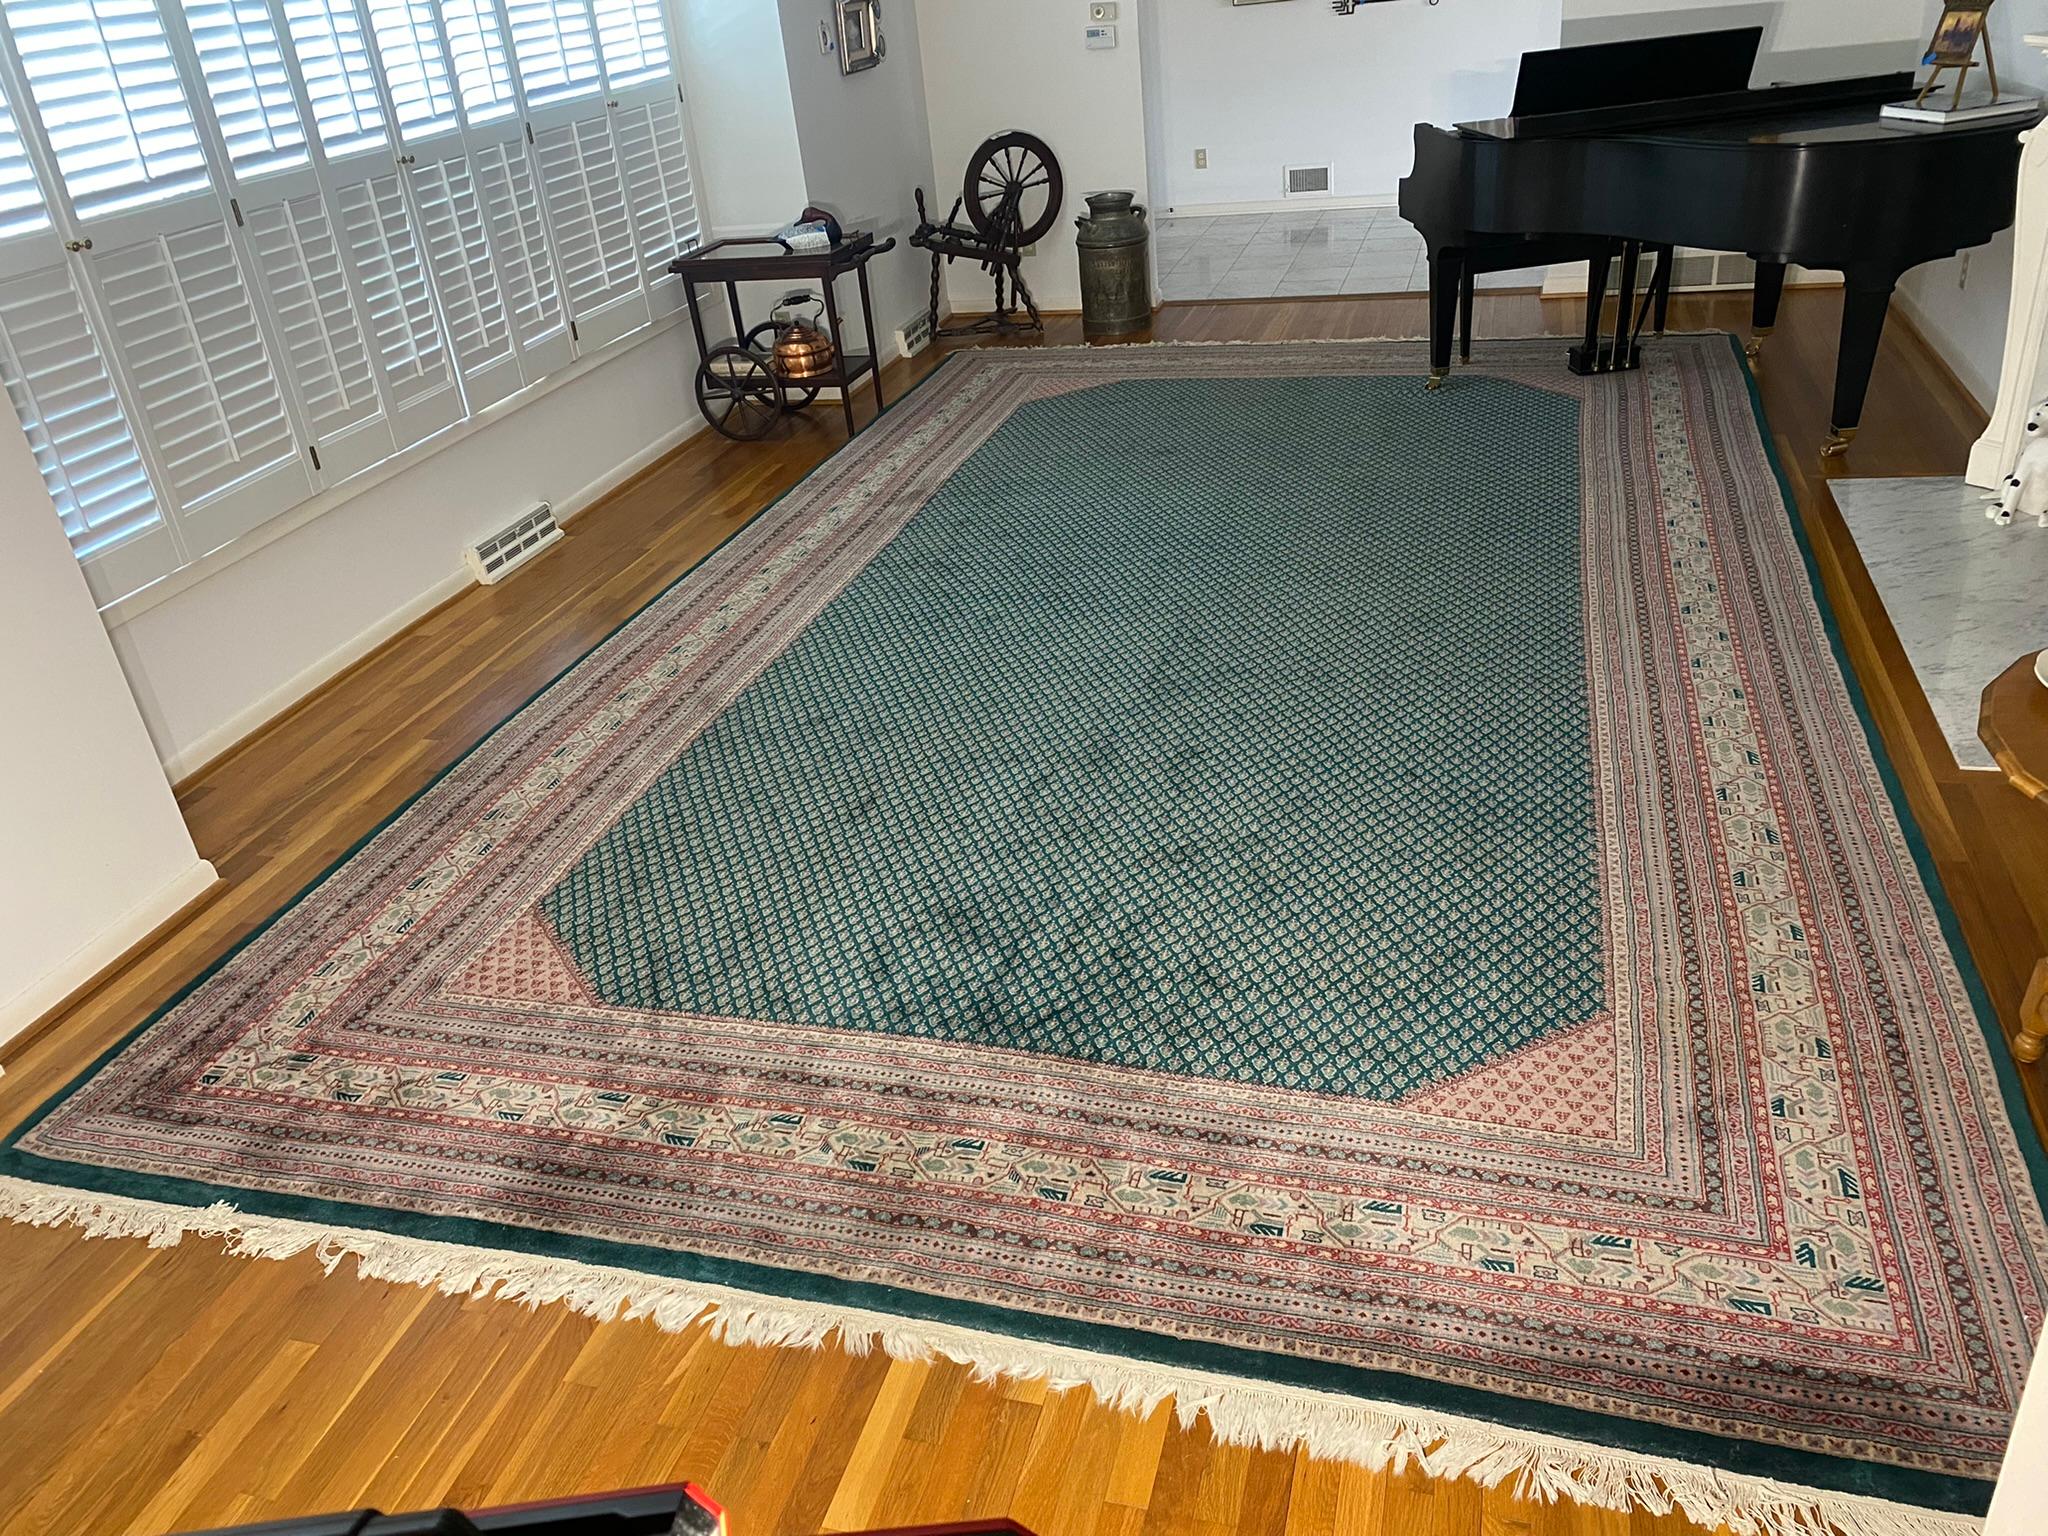 11' x 18' Hand Knotted Woven Indian Rug or Carpet